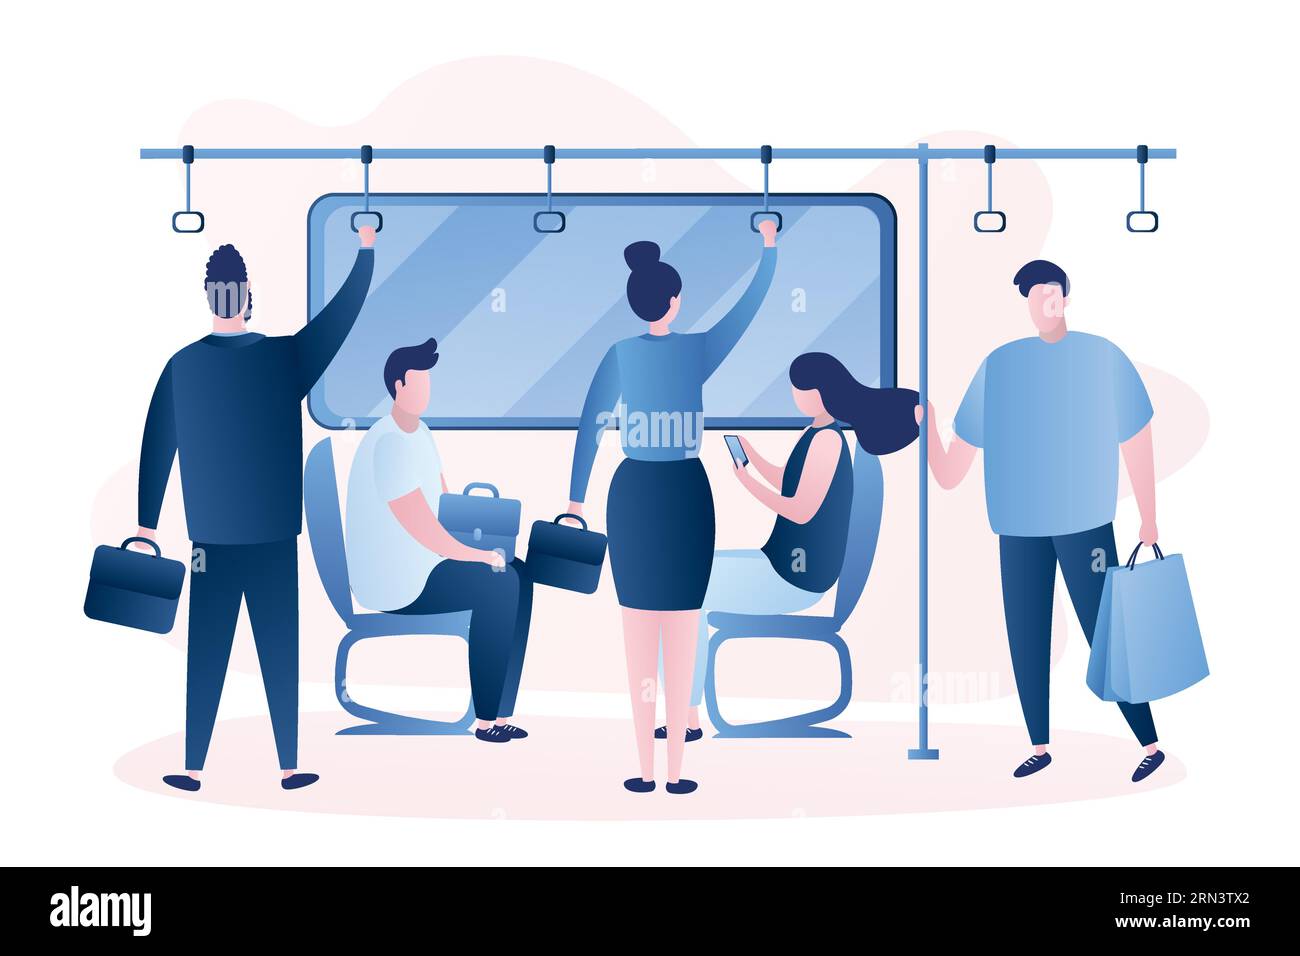 People in the subway. Male and female characters in vatious poses. Humans sitting and standing in metro. Different people using public transportation. Stock Vector